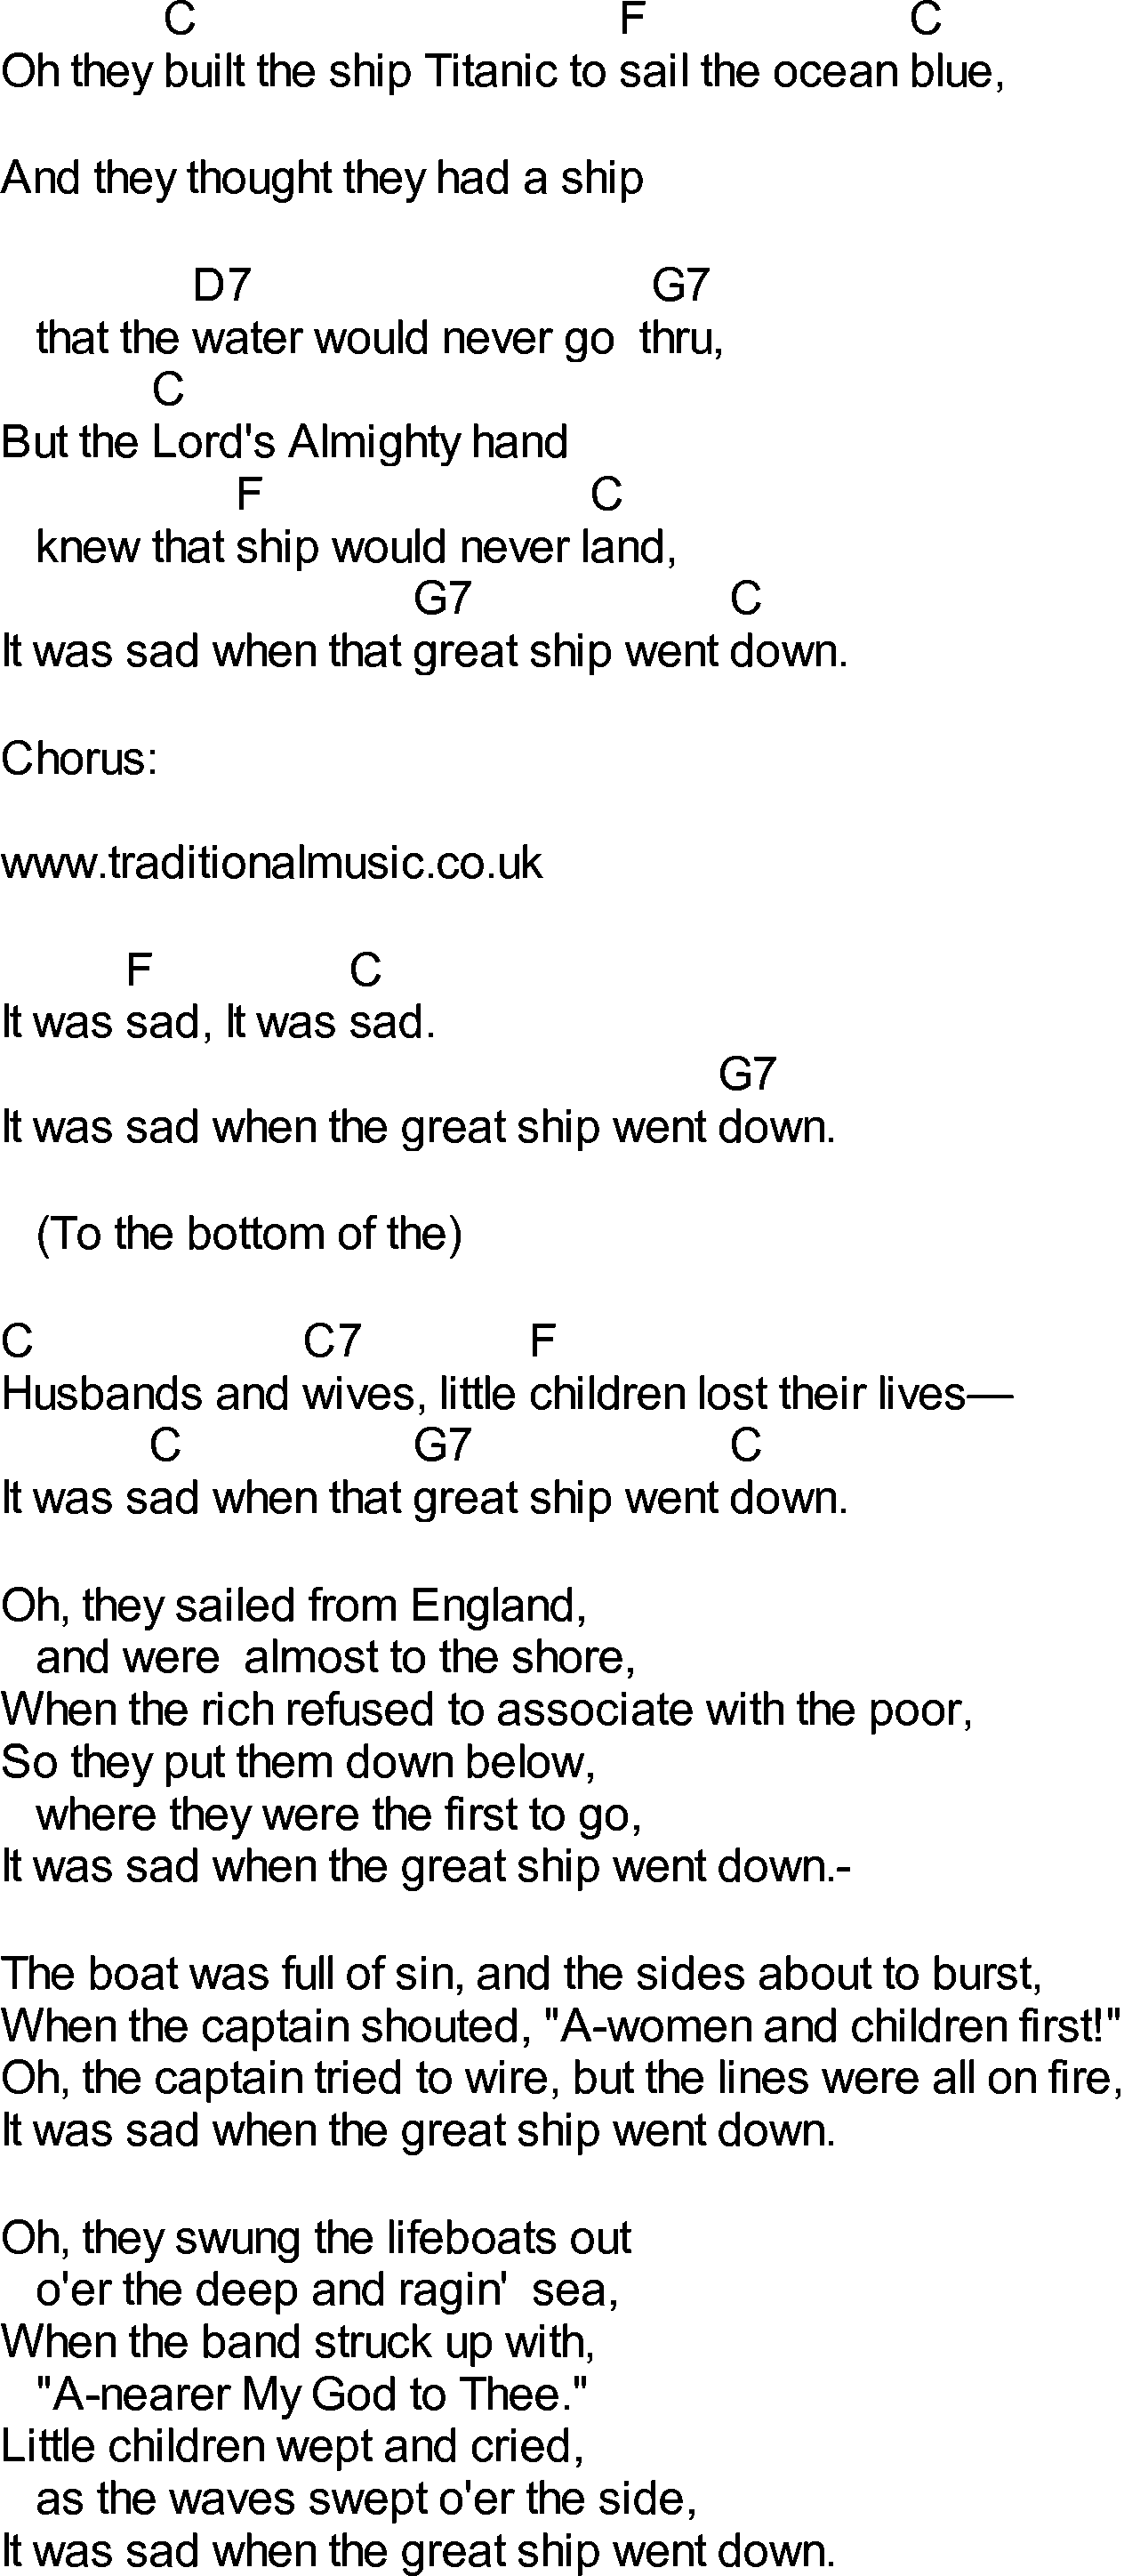 Bluegrass songs with chords - Titanic